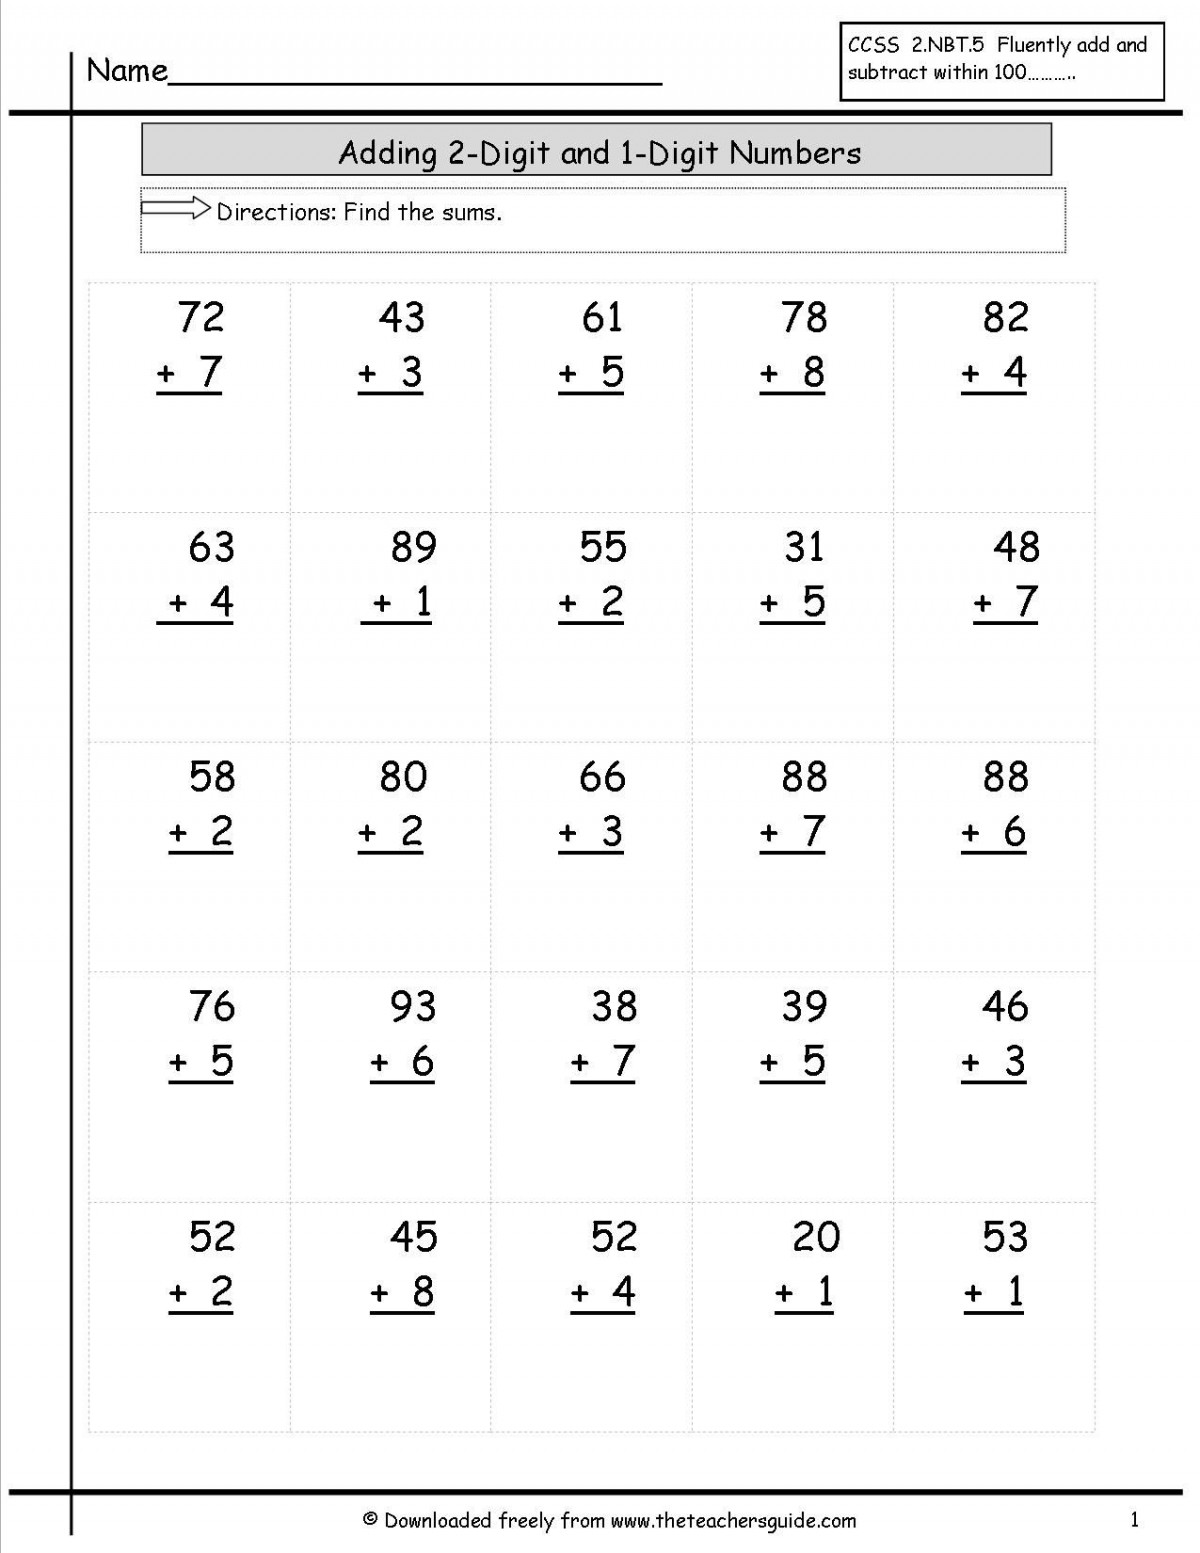 Adding 2 Digit And 1 Digit Numbers With Regrouping Worksheet